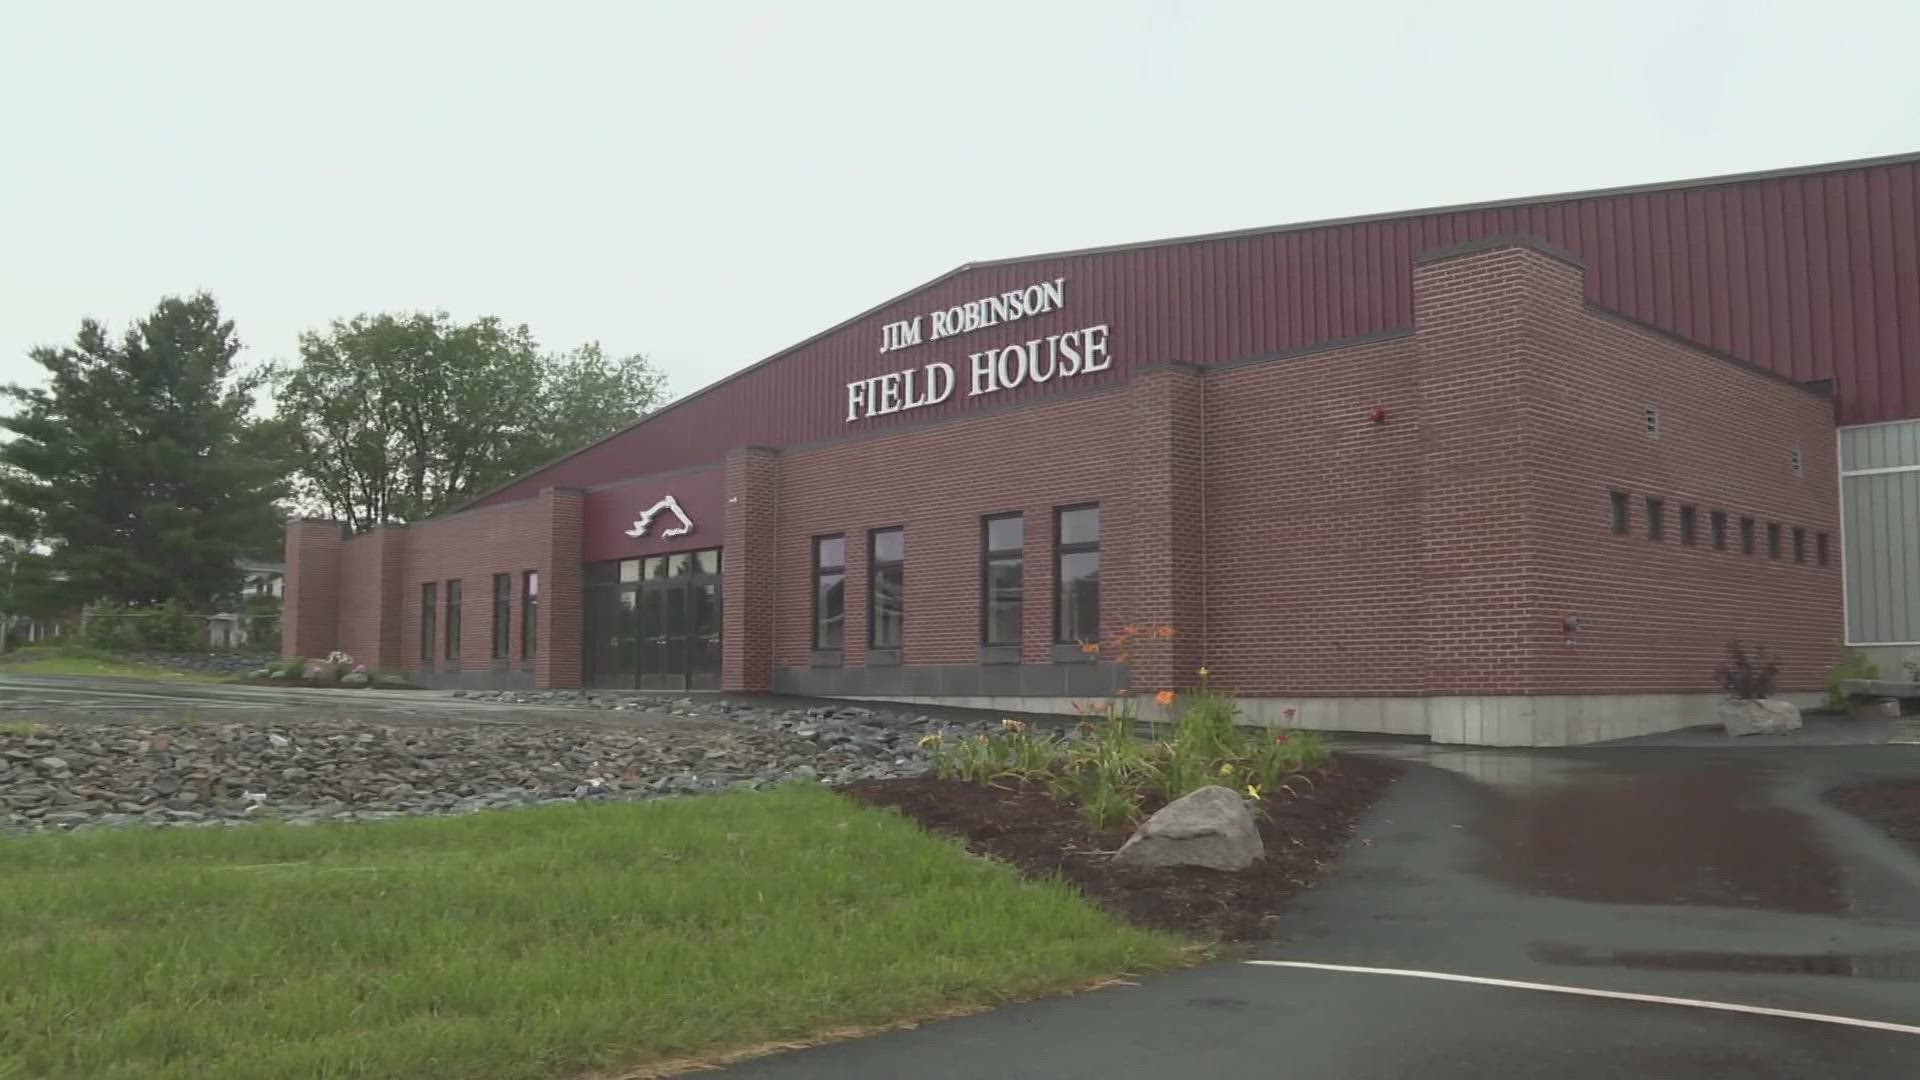 Foxcroft Academy's head of school hopes the new indoor space will provide students and the community with everything they need for competition and wellness.